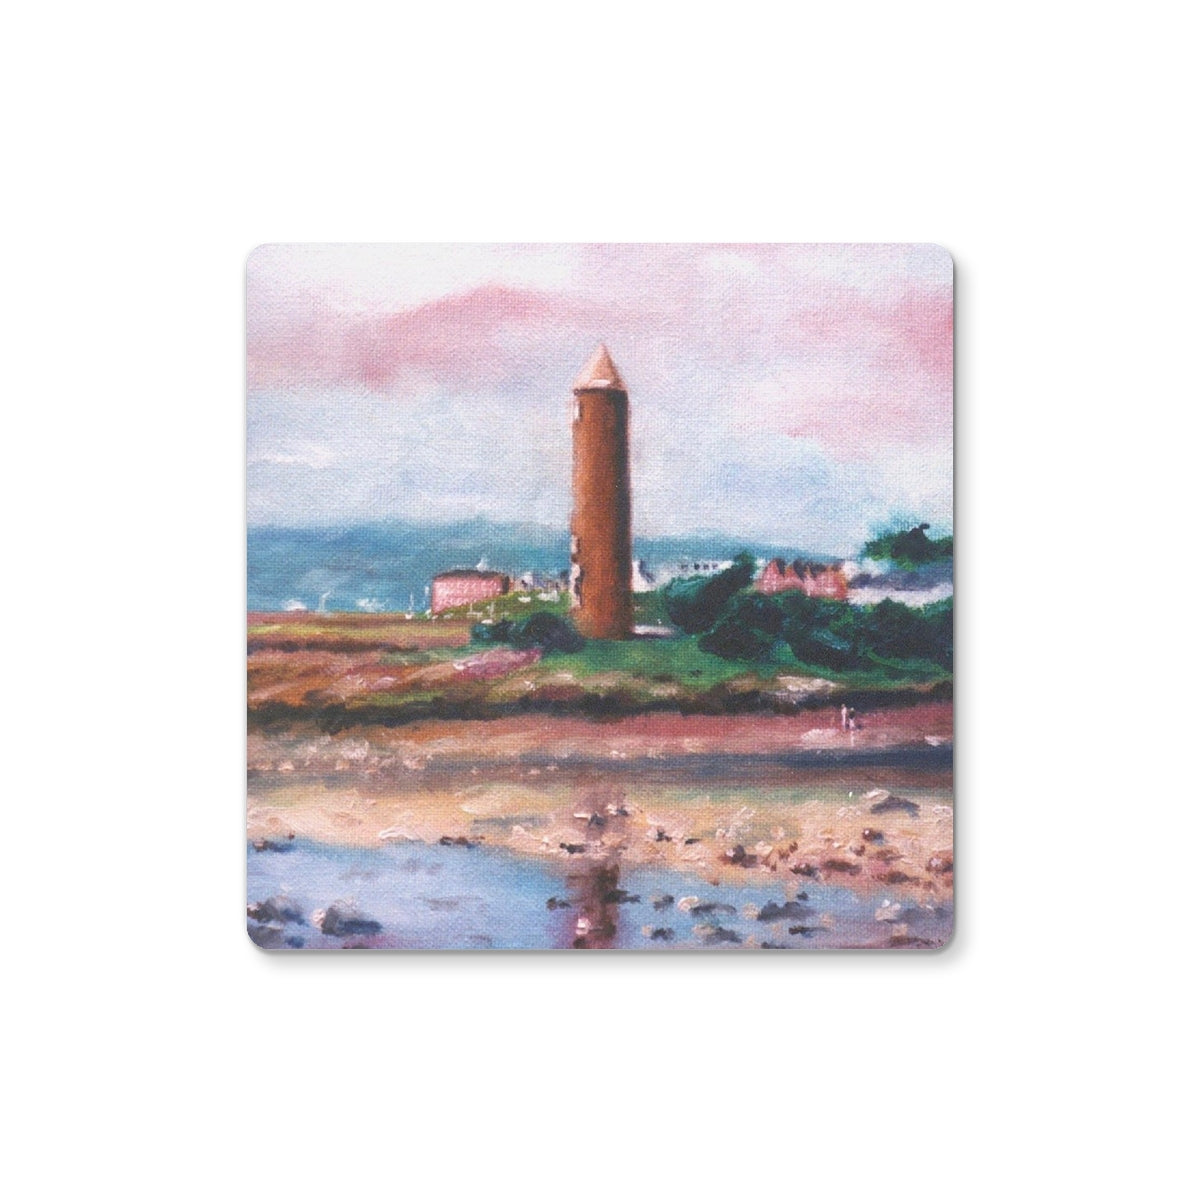 Pencil Point Largs Art Gifts Coaster-Homeware-River Clyde Art Gallery-2 Coasters-Paintings, Prints, Homeware, Art Gifts From Scotland By Scottish Artist Kevin Hunter